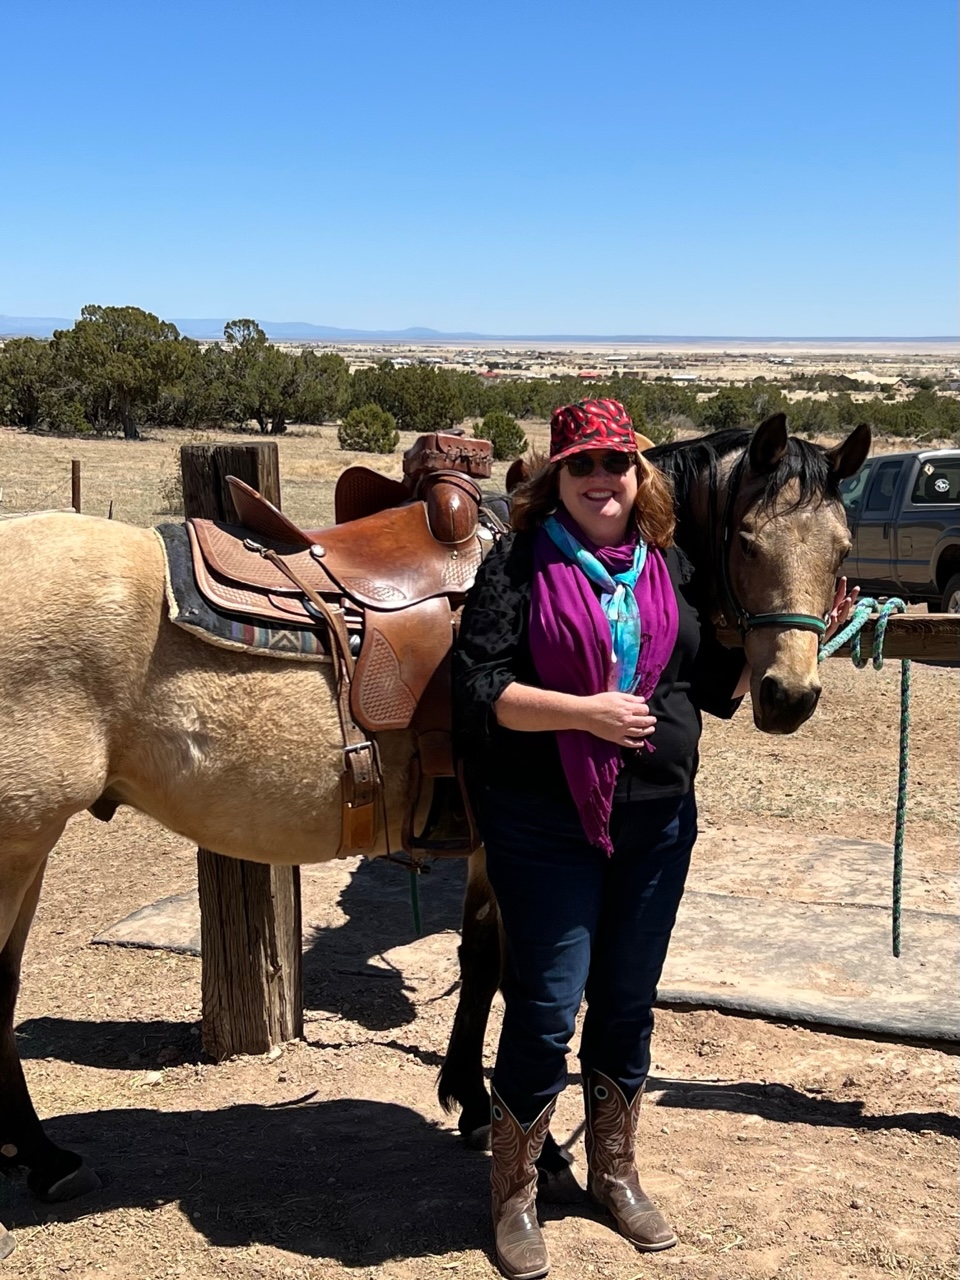 Stacey visiting her family and beloved horses in New Mexico